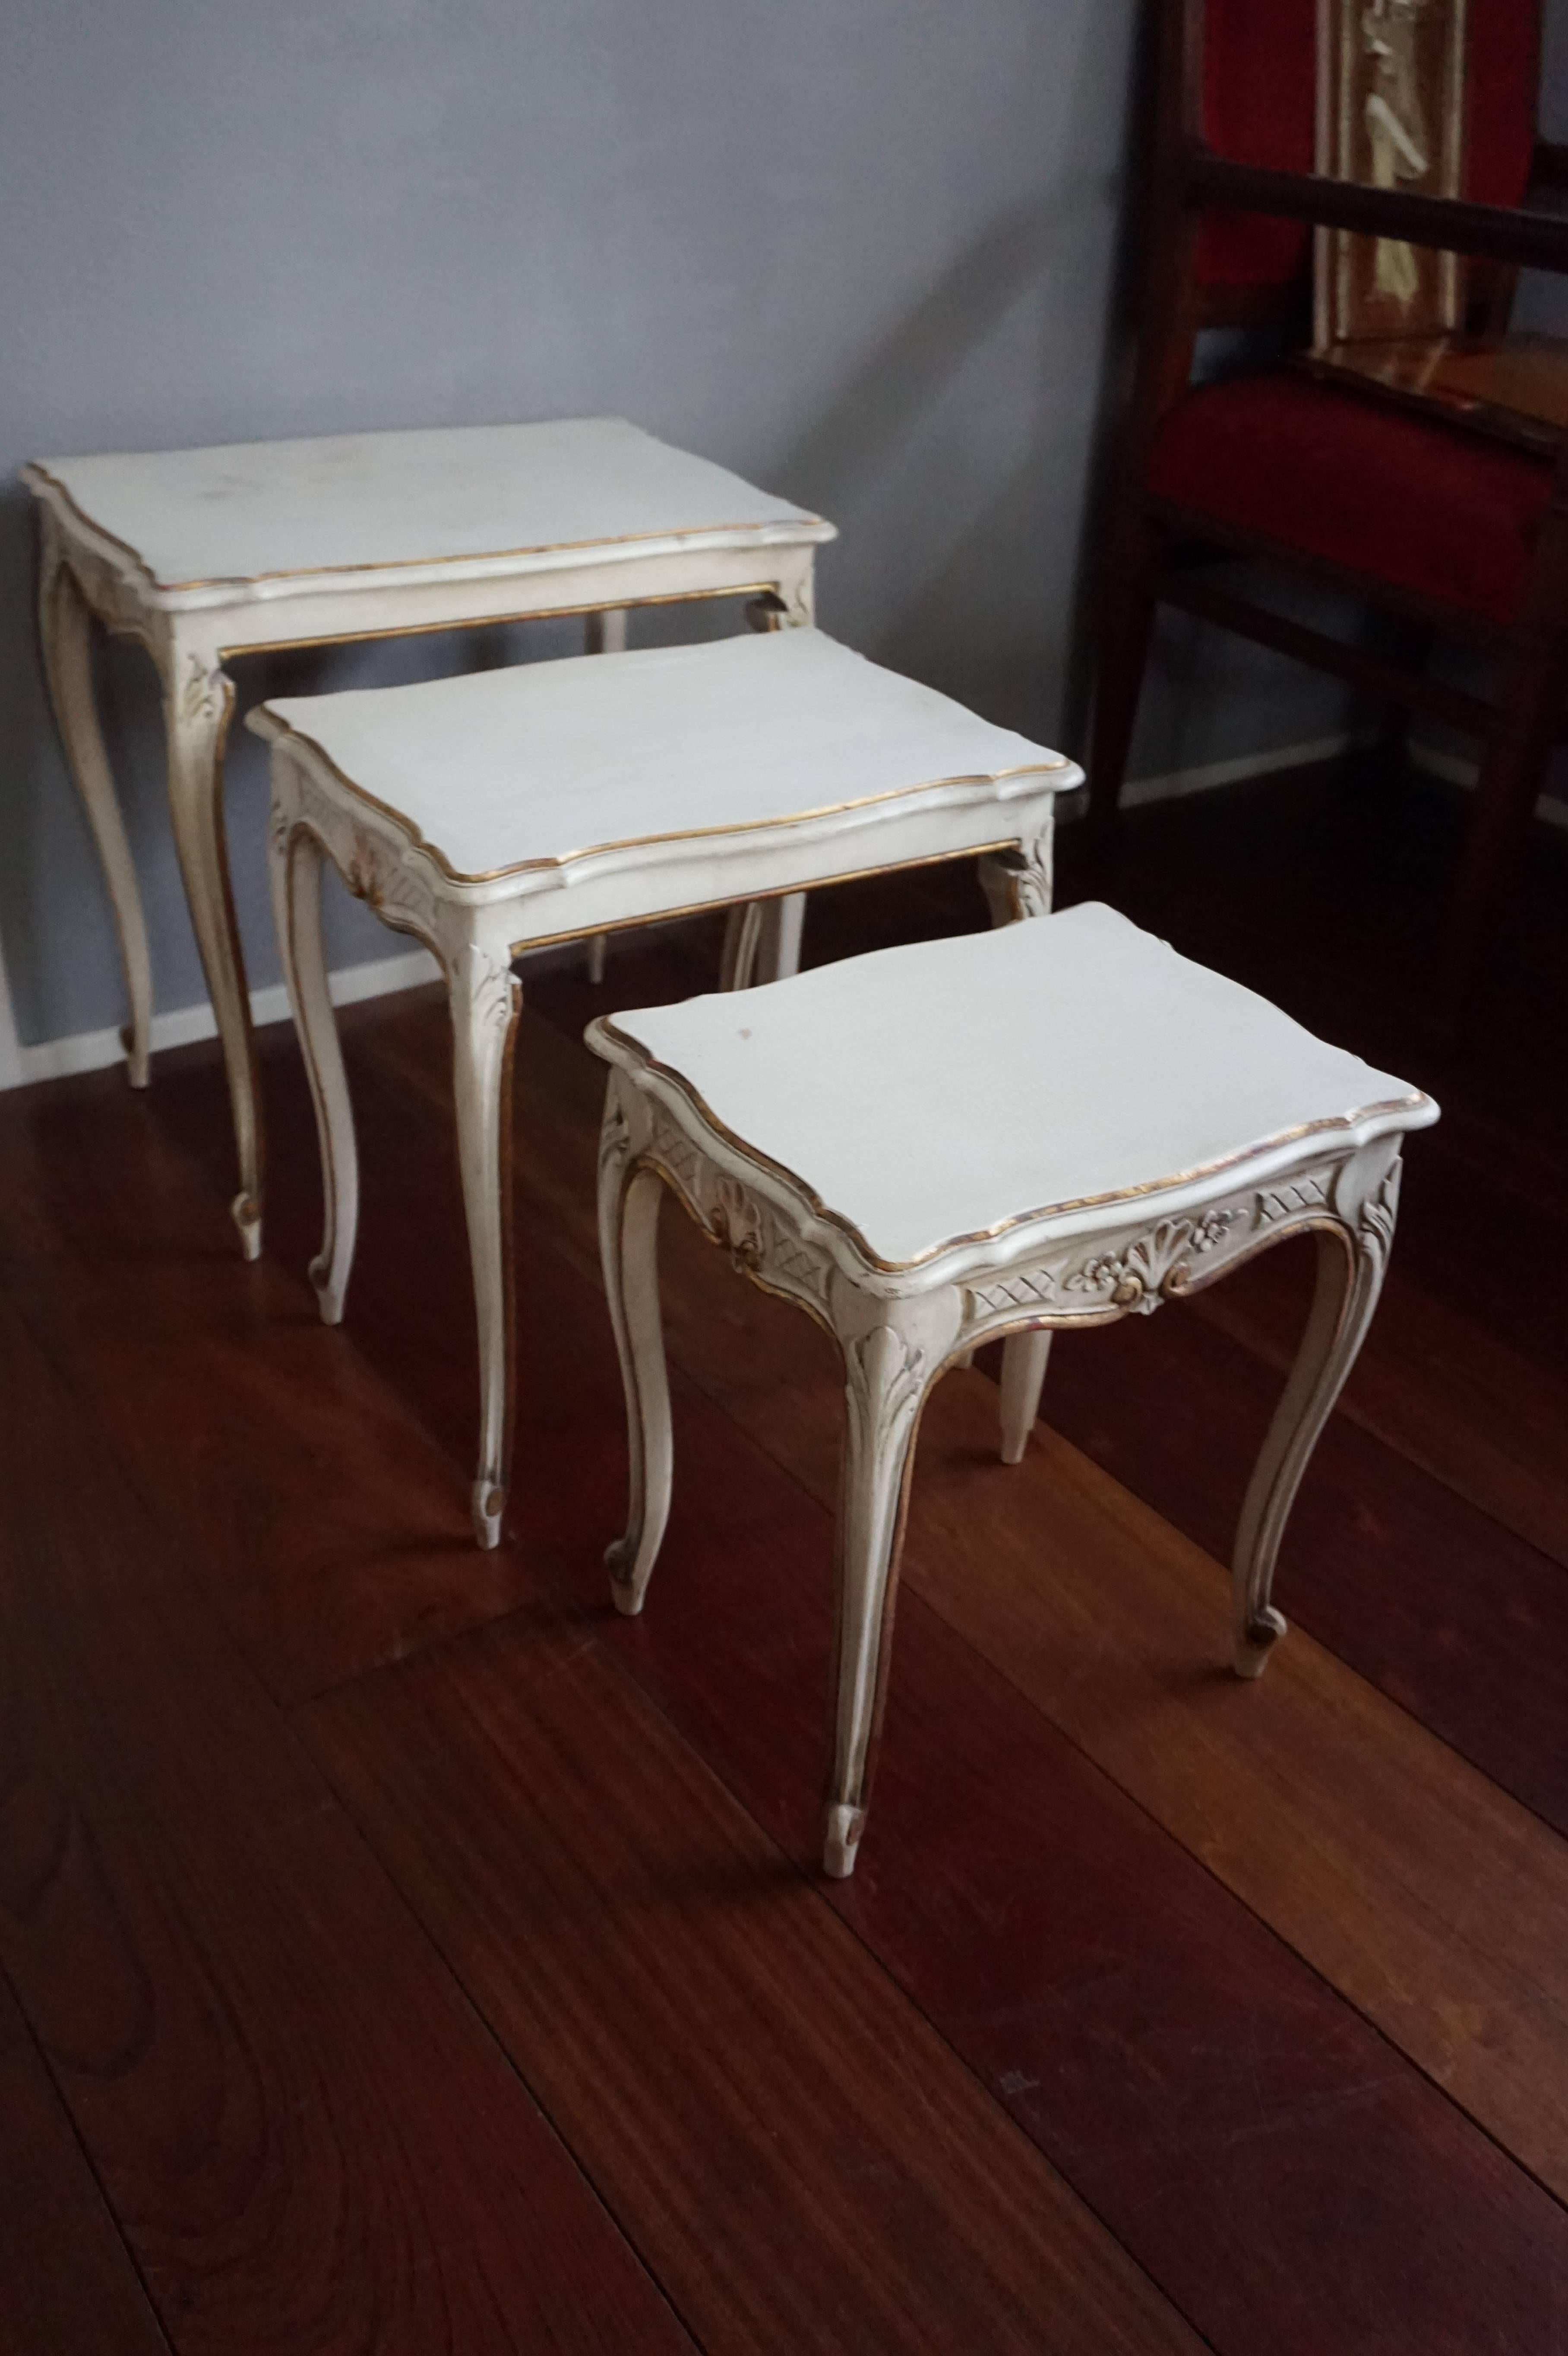 Early 20th Century Italian or French Nest of Tables in Beige-White with Gilding 1